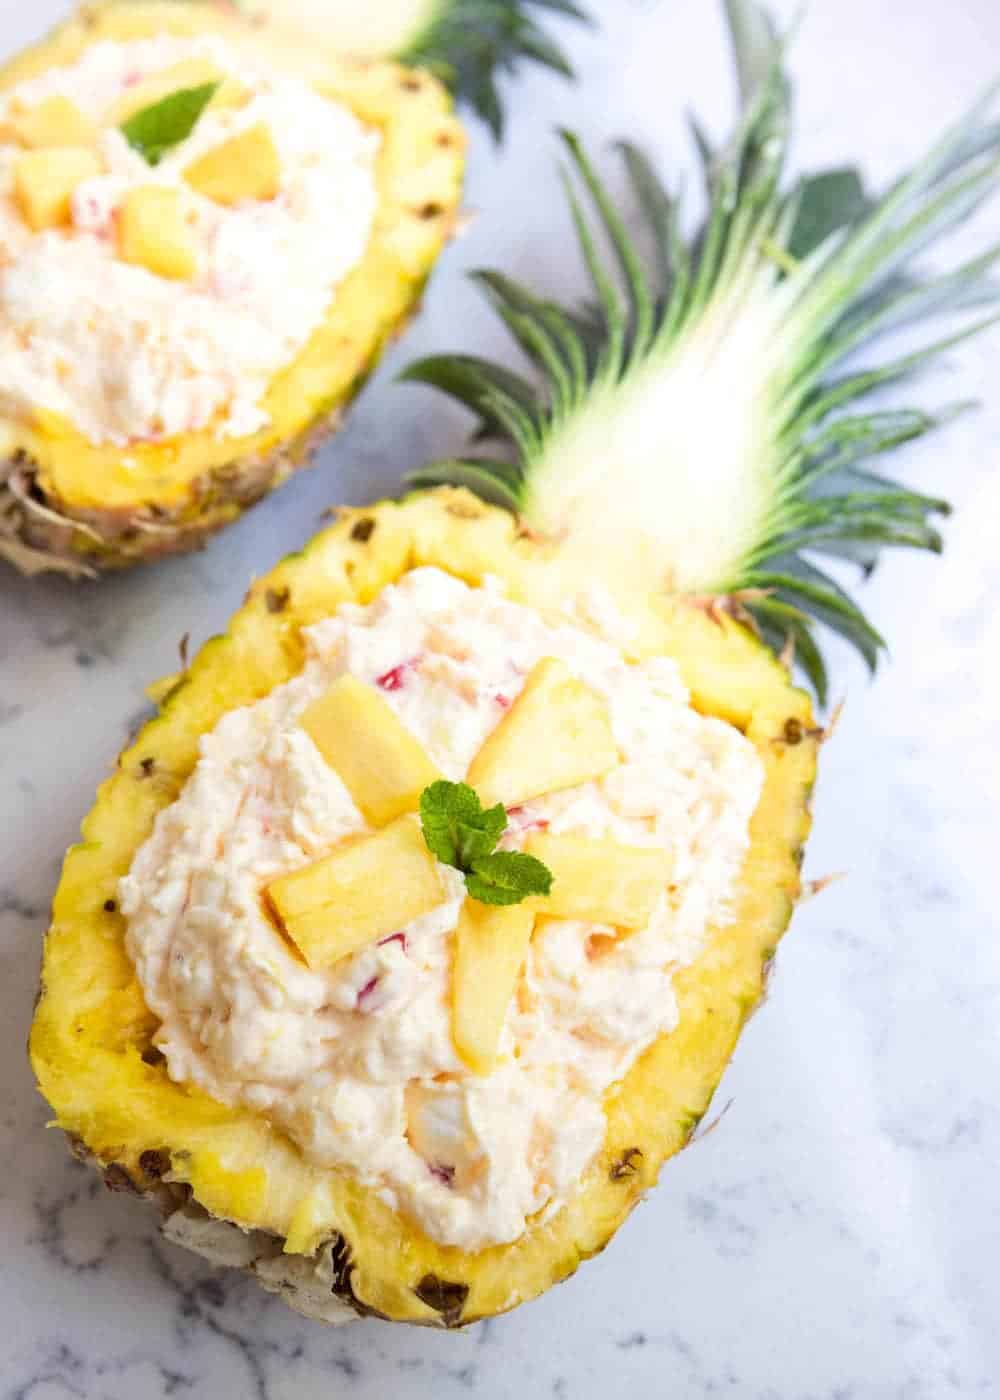 Pineapple fluff in a fresh pineapple boat.